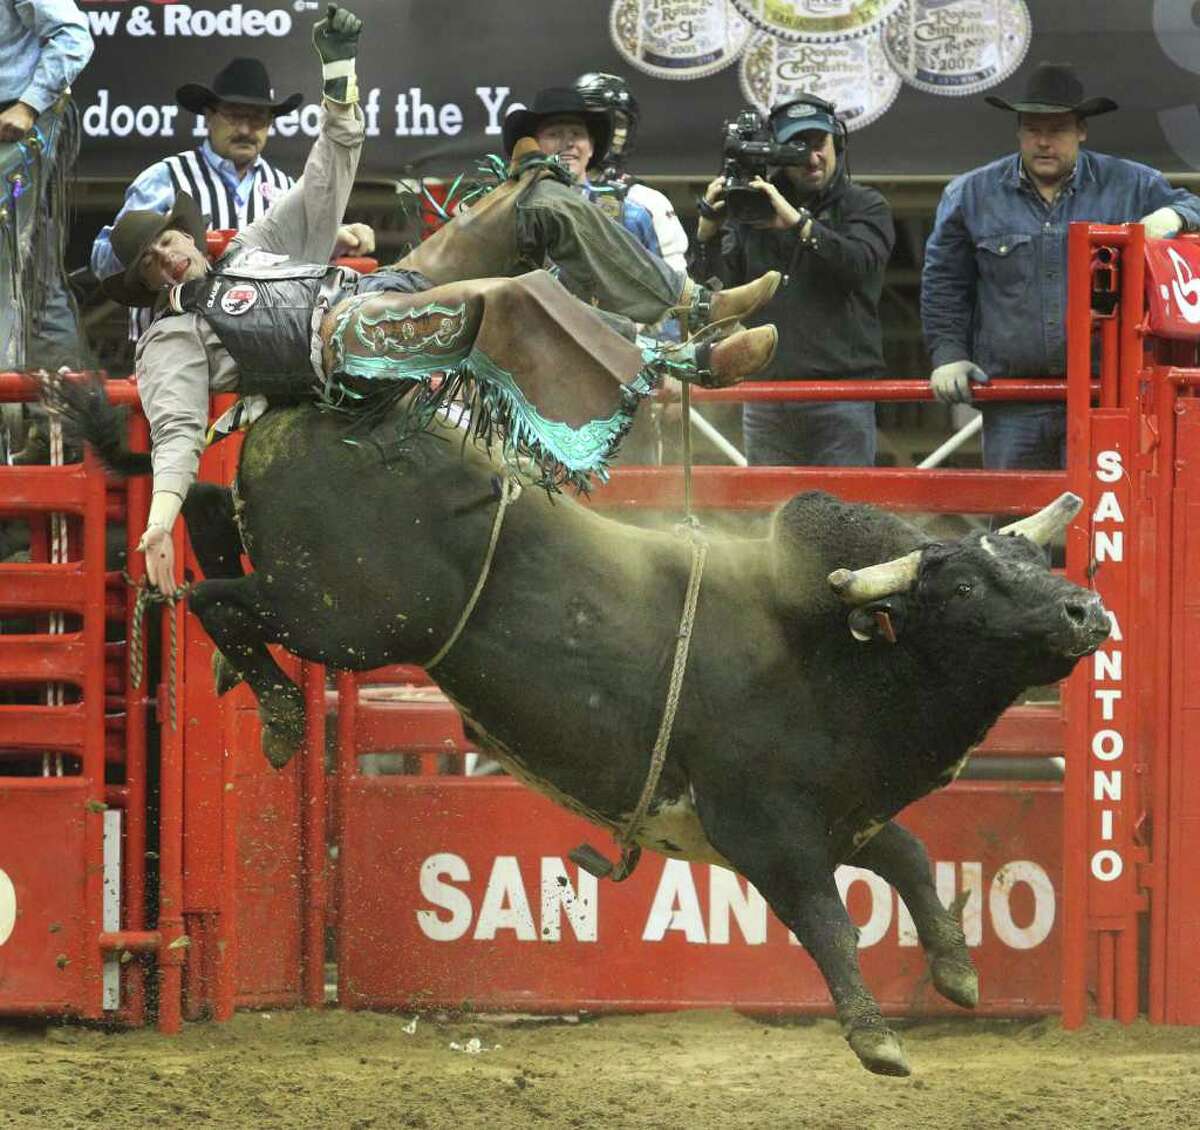 Seth Glause of Cheyenne, Wyo., flies off a bull Sunday, Feb. 12, 2012 during the bull riding competition at the San Antonio Stock Show & Rodeo.